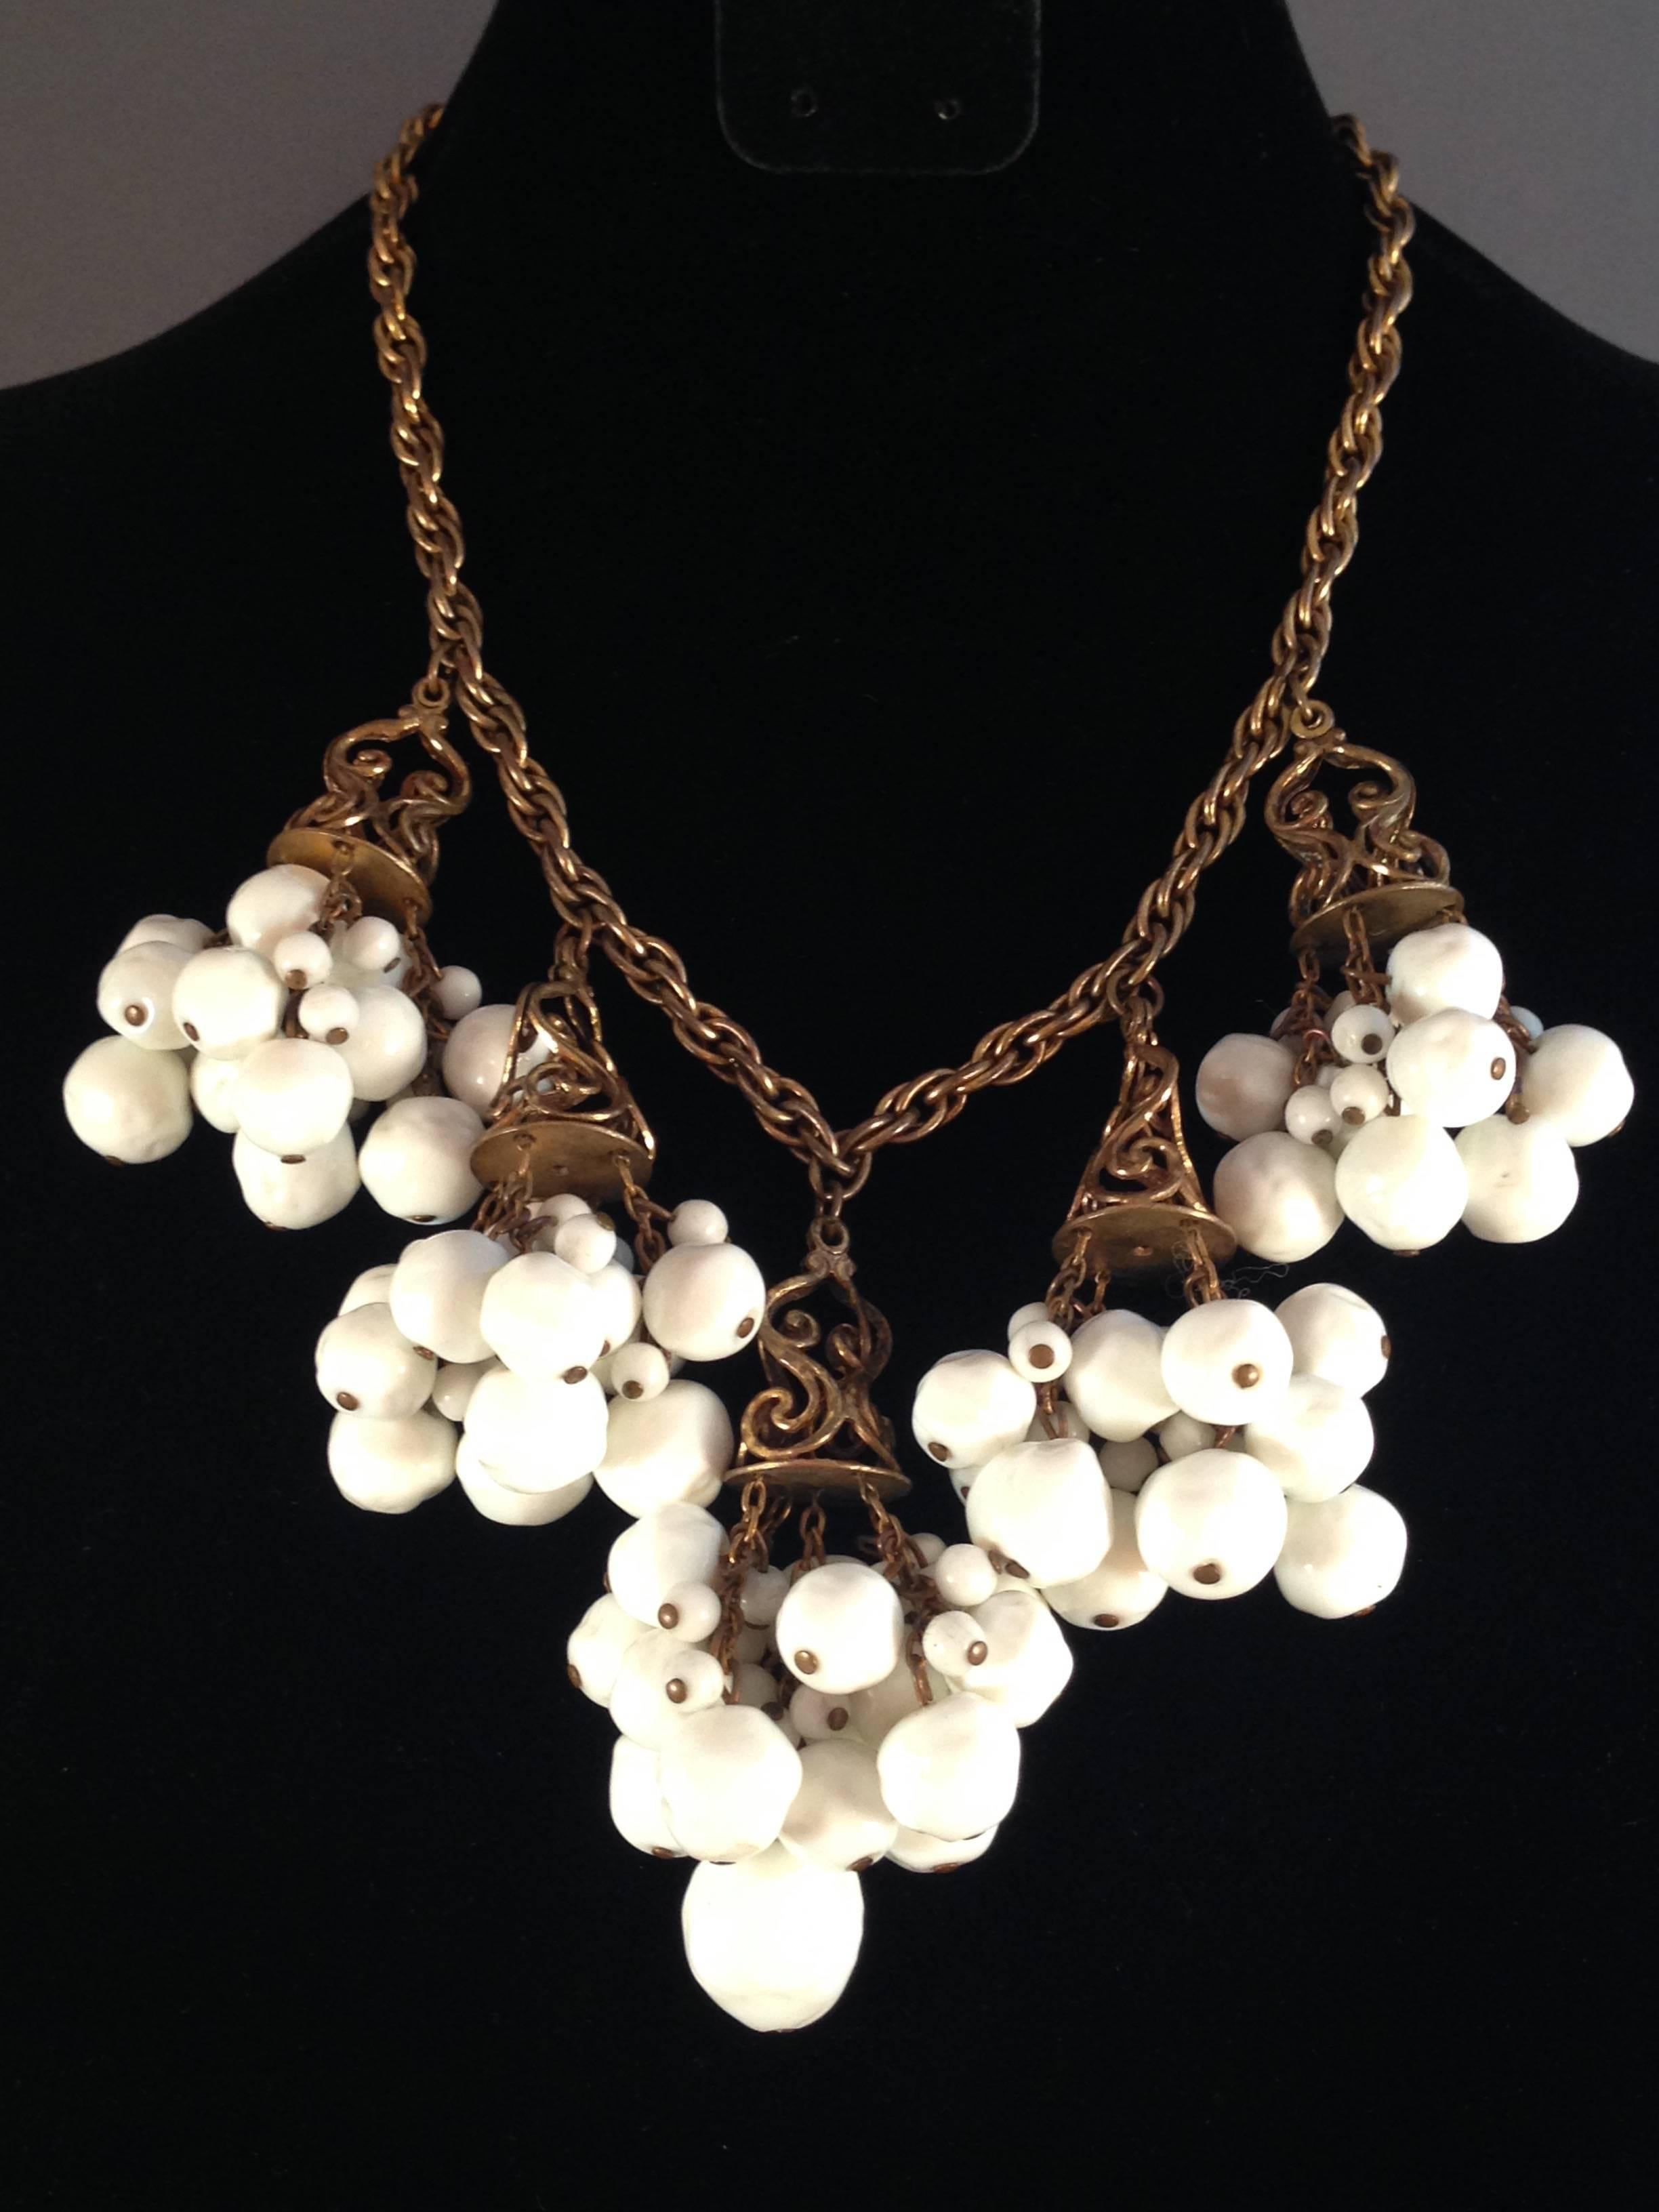 This is a 1940's white glass unsigned necklace designed by Frank Hess for Miriam Haskell. It is a signature Haskell piece. The early Haskell pieces were not signed. Pieces started to be signed in 1947. 

The necklace is made up of five white glass